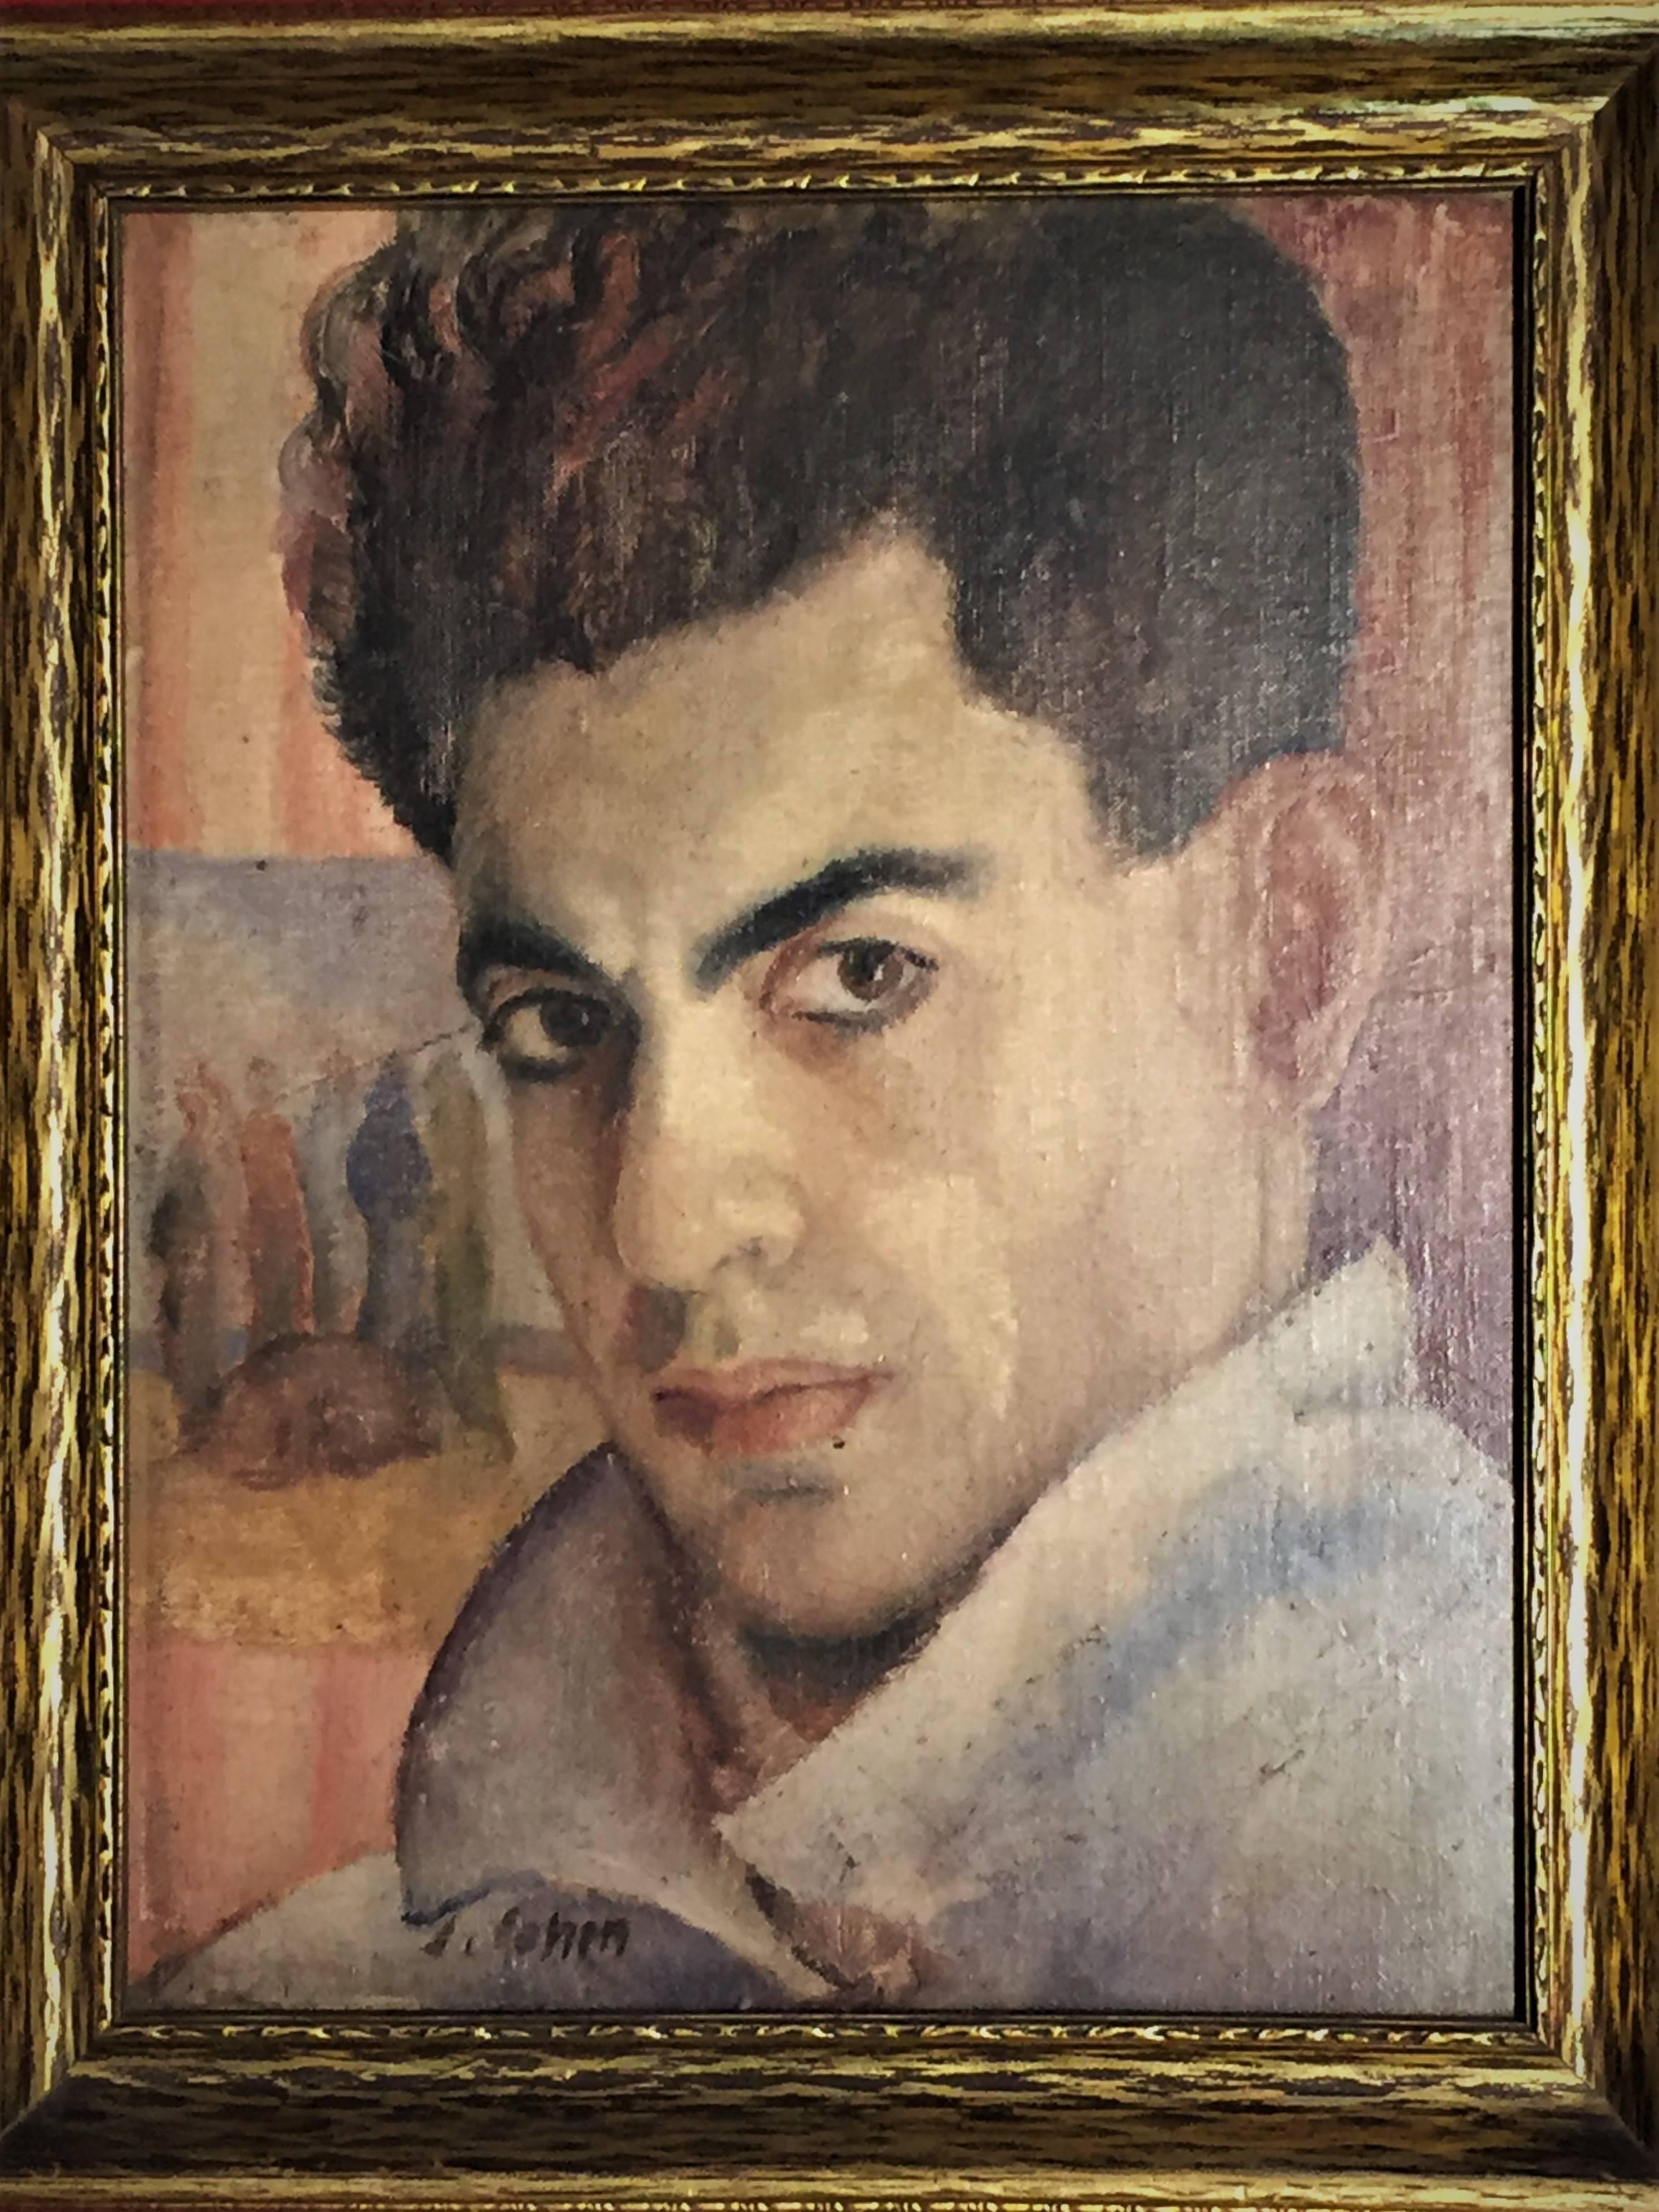 Other J. Cohen, Portrait of a Man, Oil Painting, circa 1950s